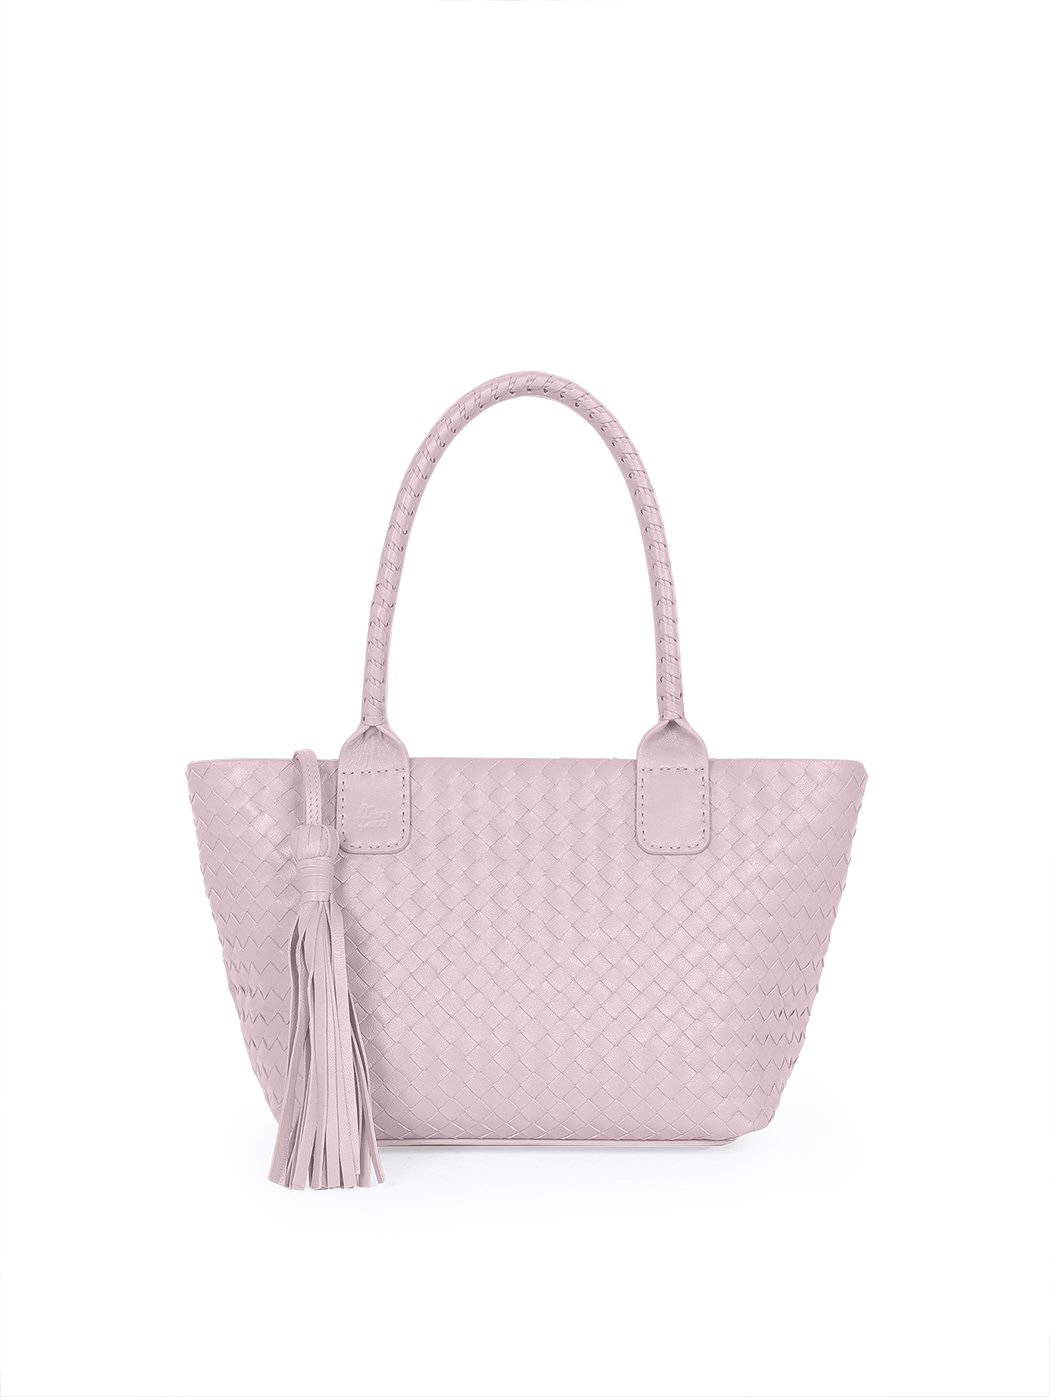 Medium Top Handle Woven Leather Shoulder Tote